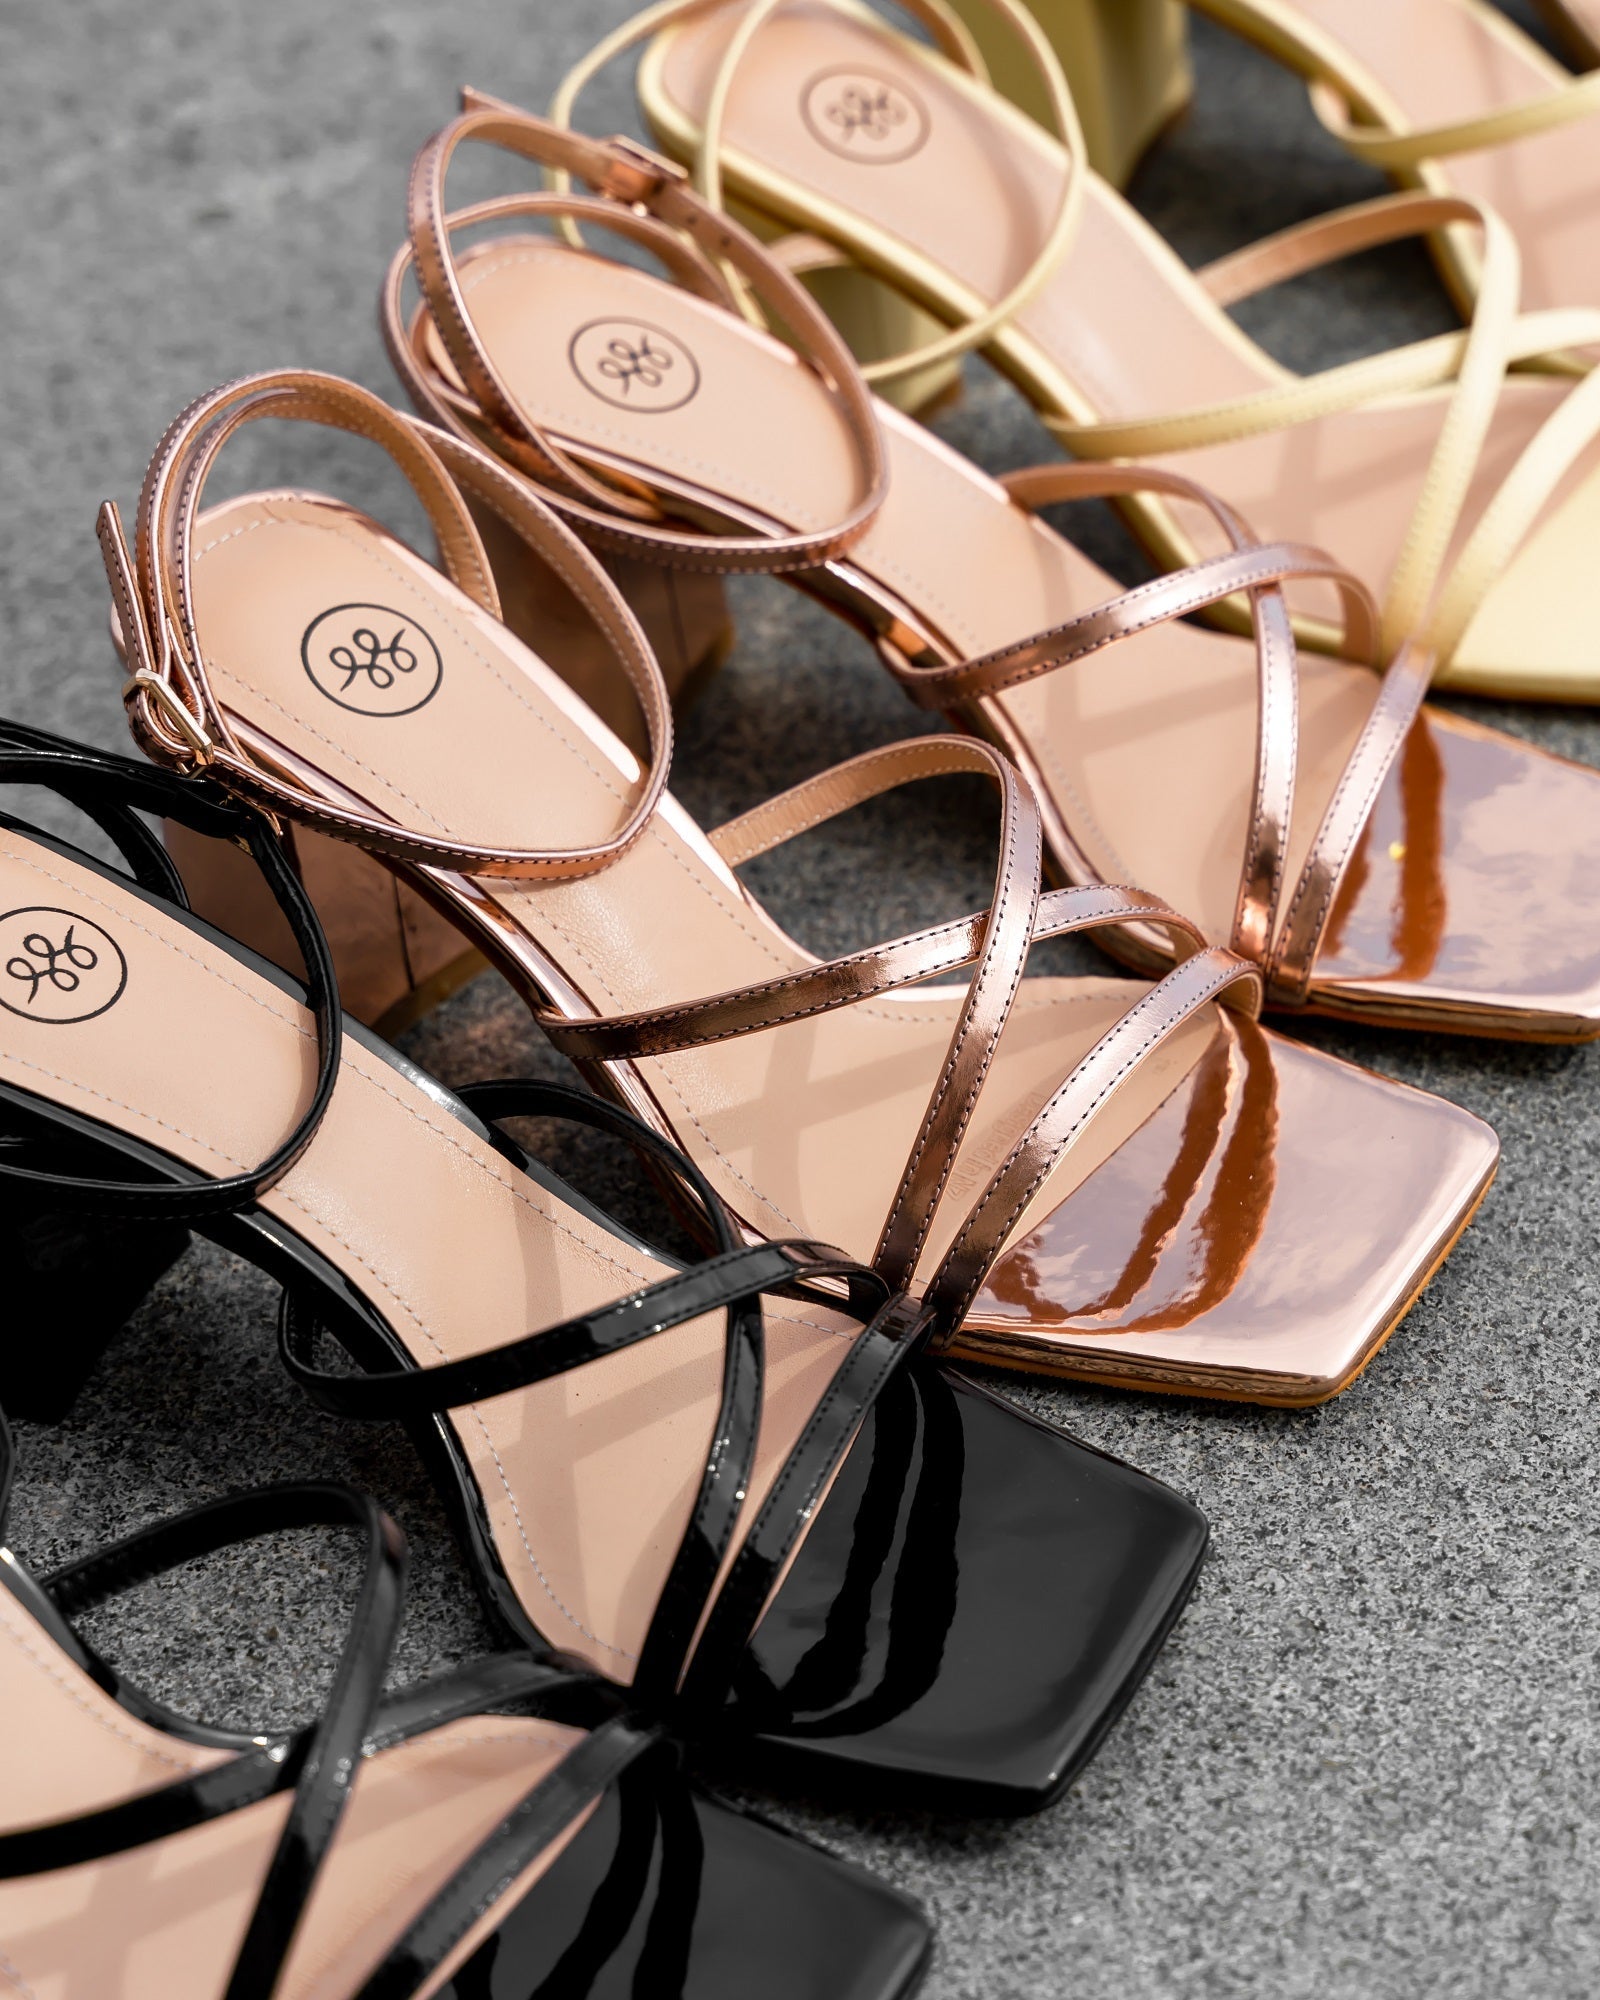 Ky Sandal Heel Rose Gold Heels by Sole Shoes NZ H22-36